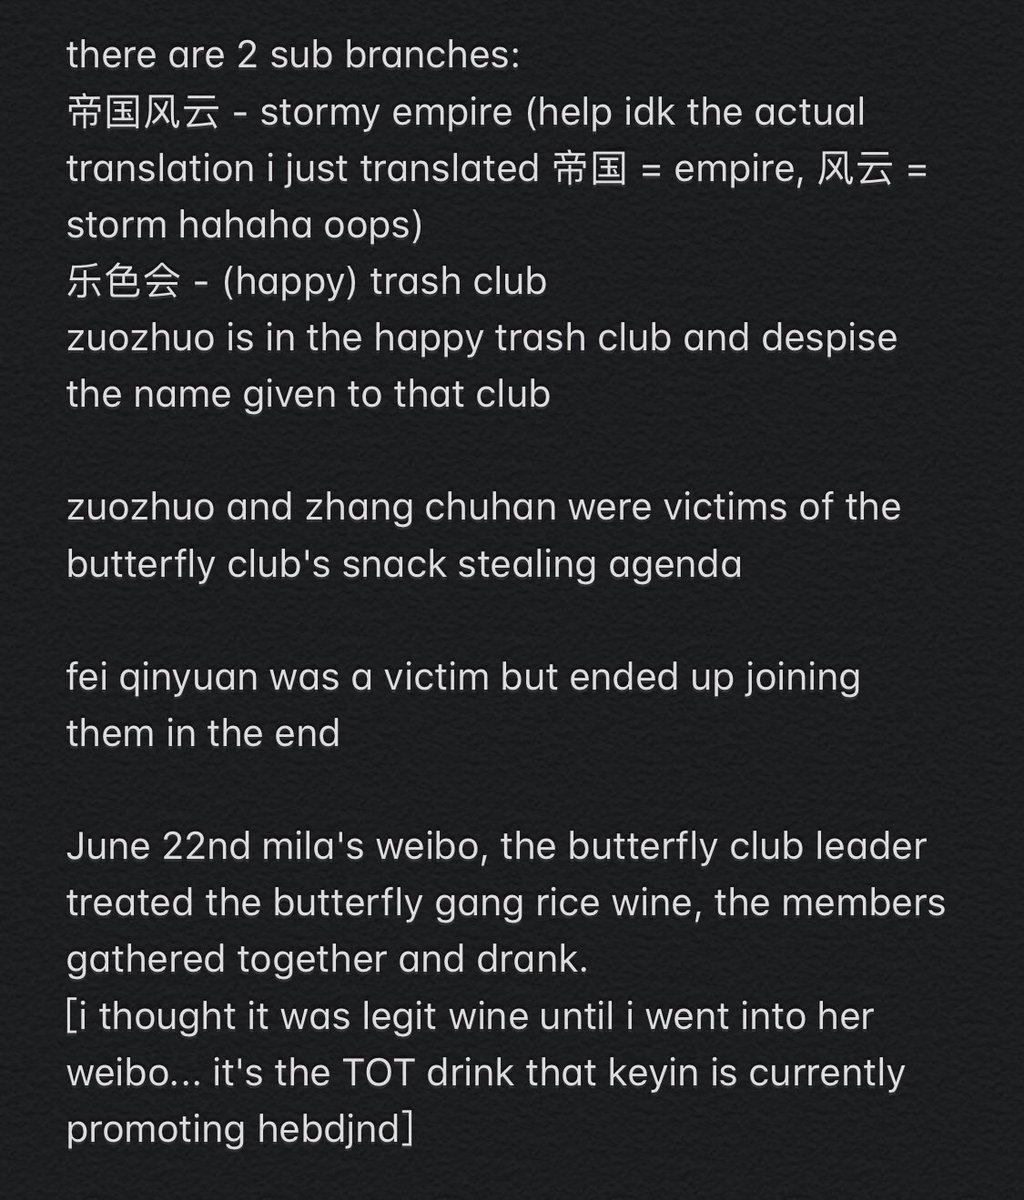 PART 2/2 OF BUTTERFLY CLUB - the 2 sub branches - mila's weibo update + keyin's reply